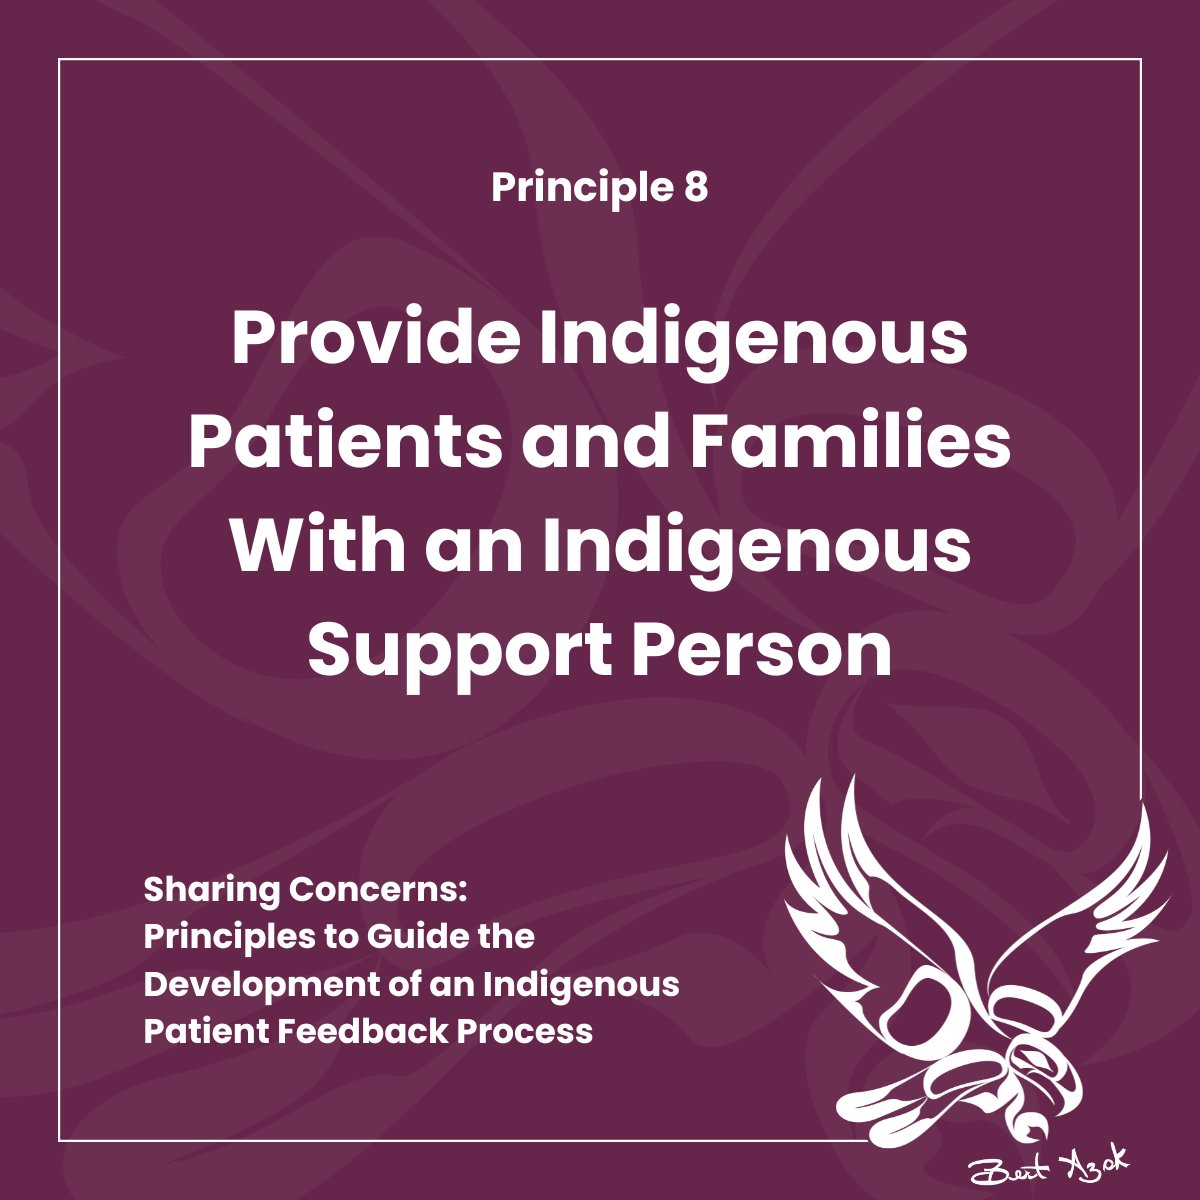 Provide Indigenous Patients and Families With an Indigenous Support Person Discover why this principle is important and how it can be actioned in Sharing Concerns: Principles to Guide the Development of an Indigenous Patient Feedback Process. ow.ly/VFgv50RvhaW